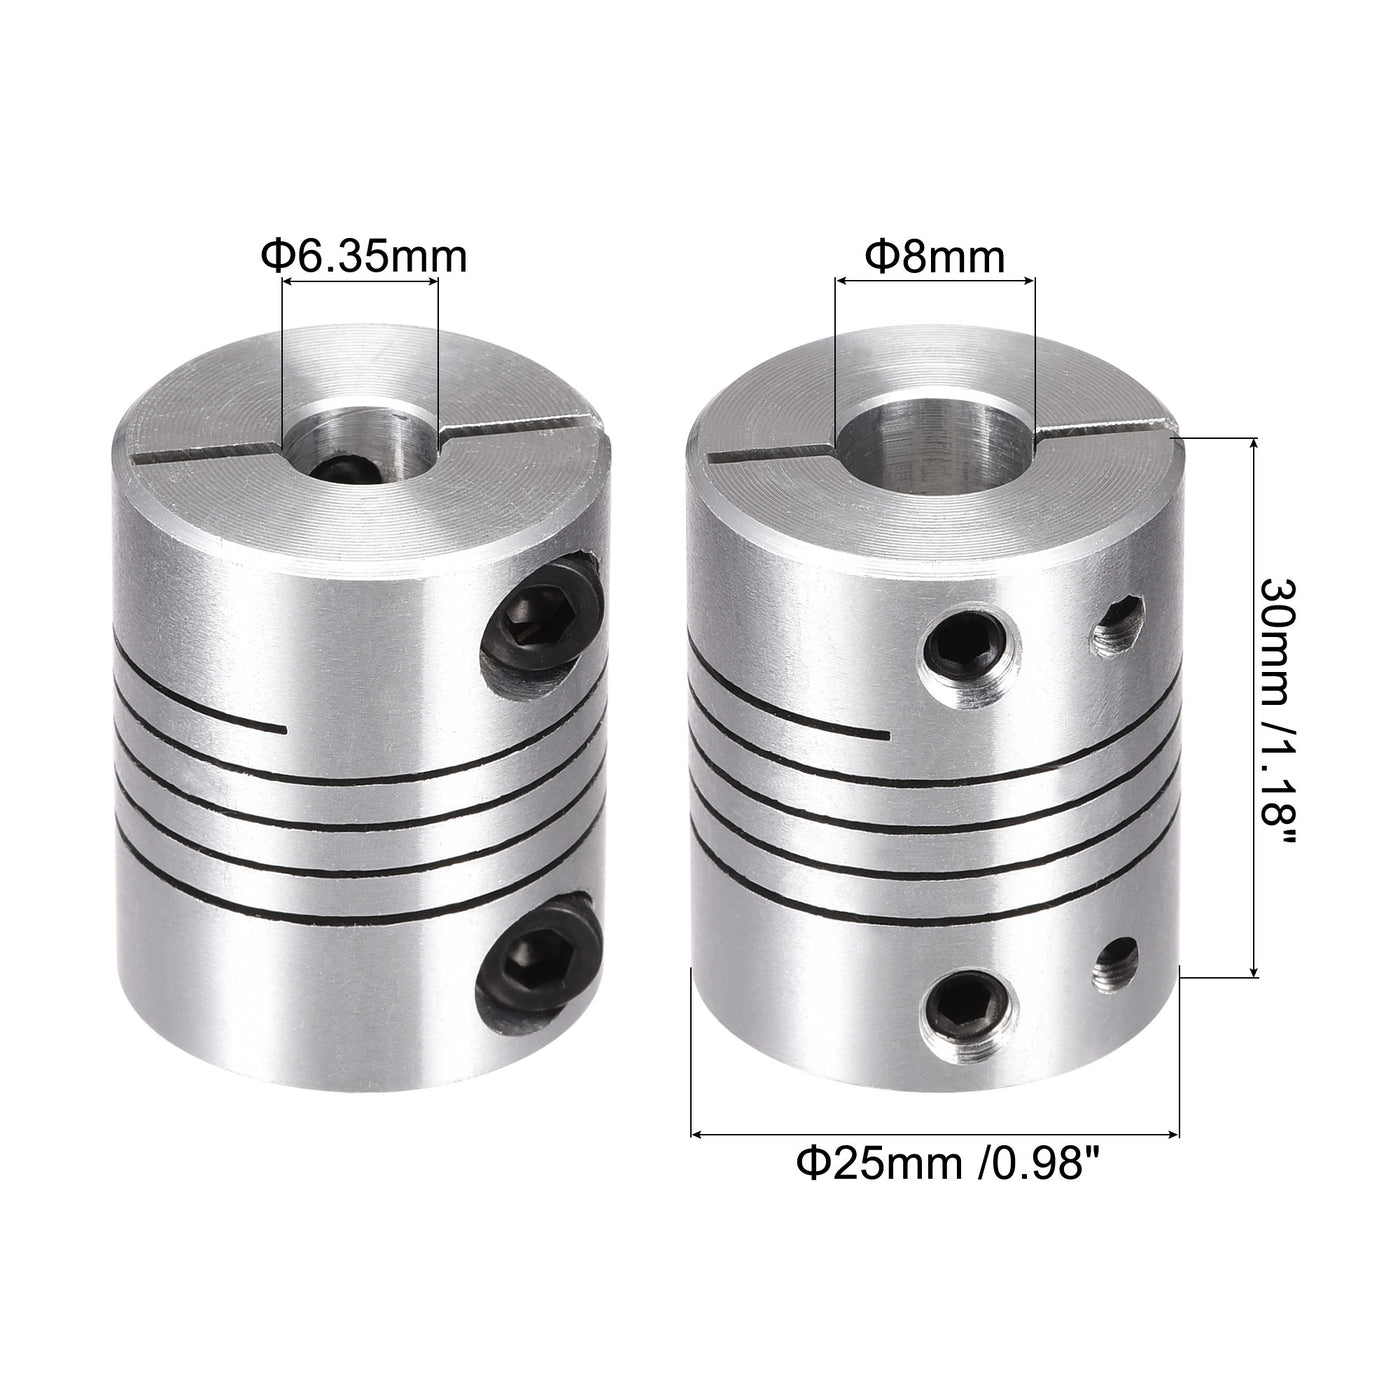 uxcell Uxcell 2PCS Motor Shaft 6.35mm to 8mm Helical Beam Coupler Coupling 25mm Dia 30mm Long